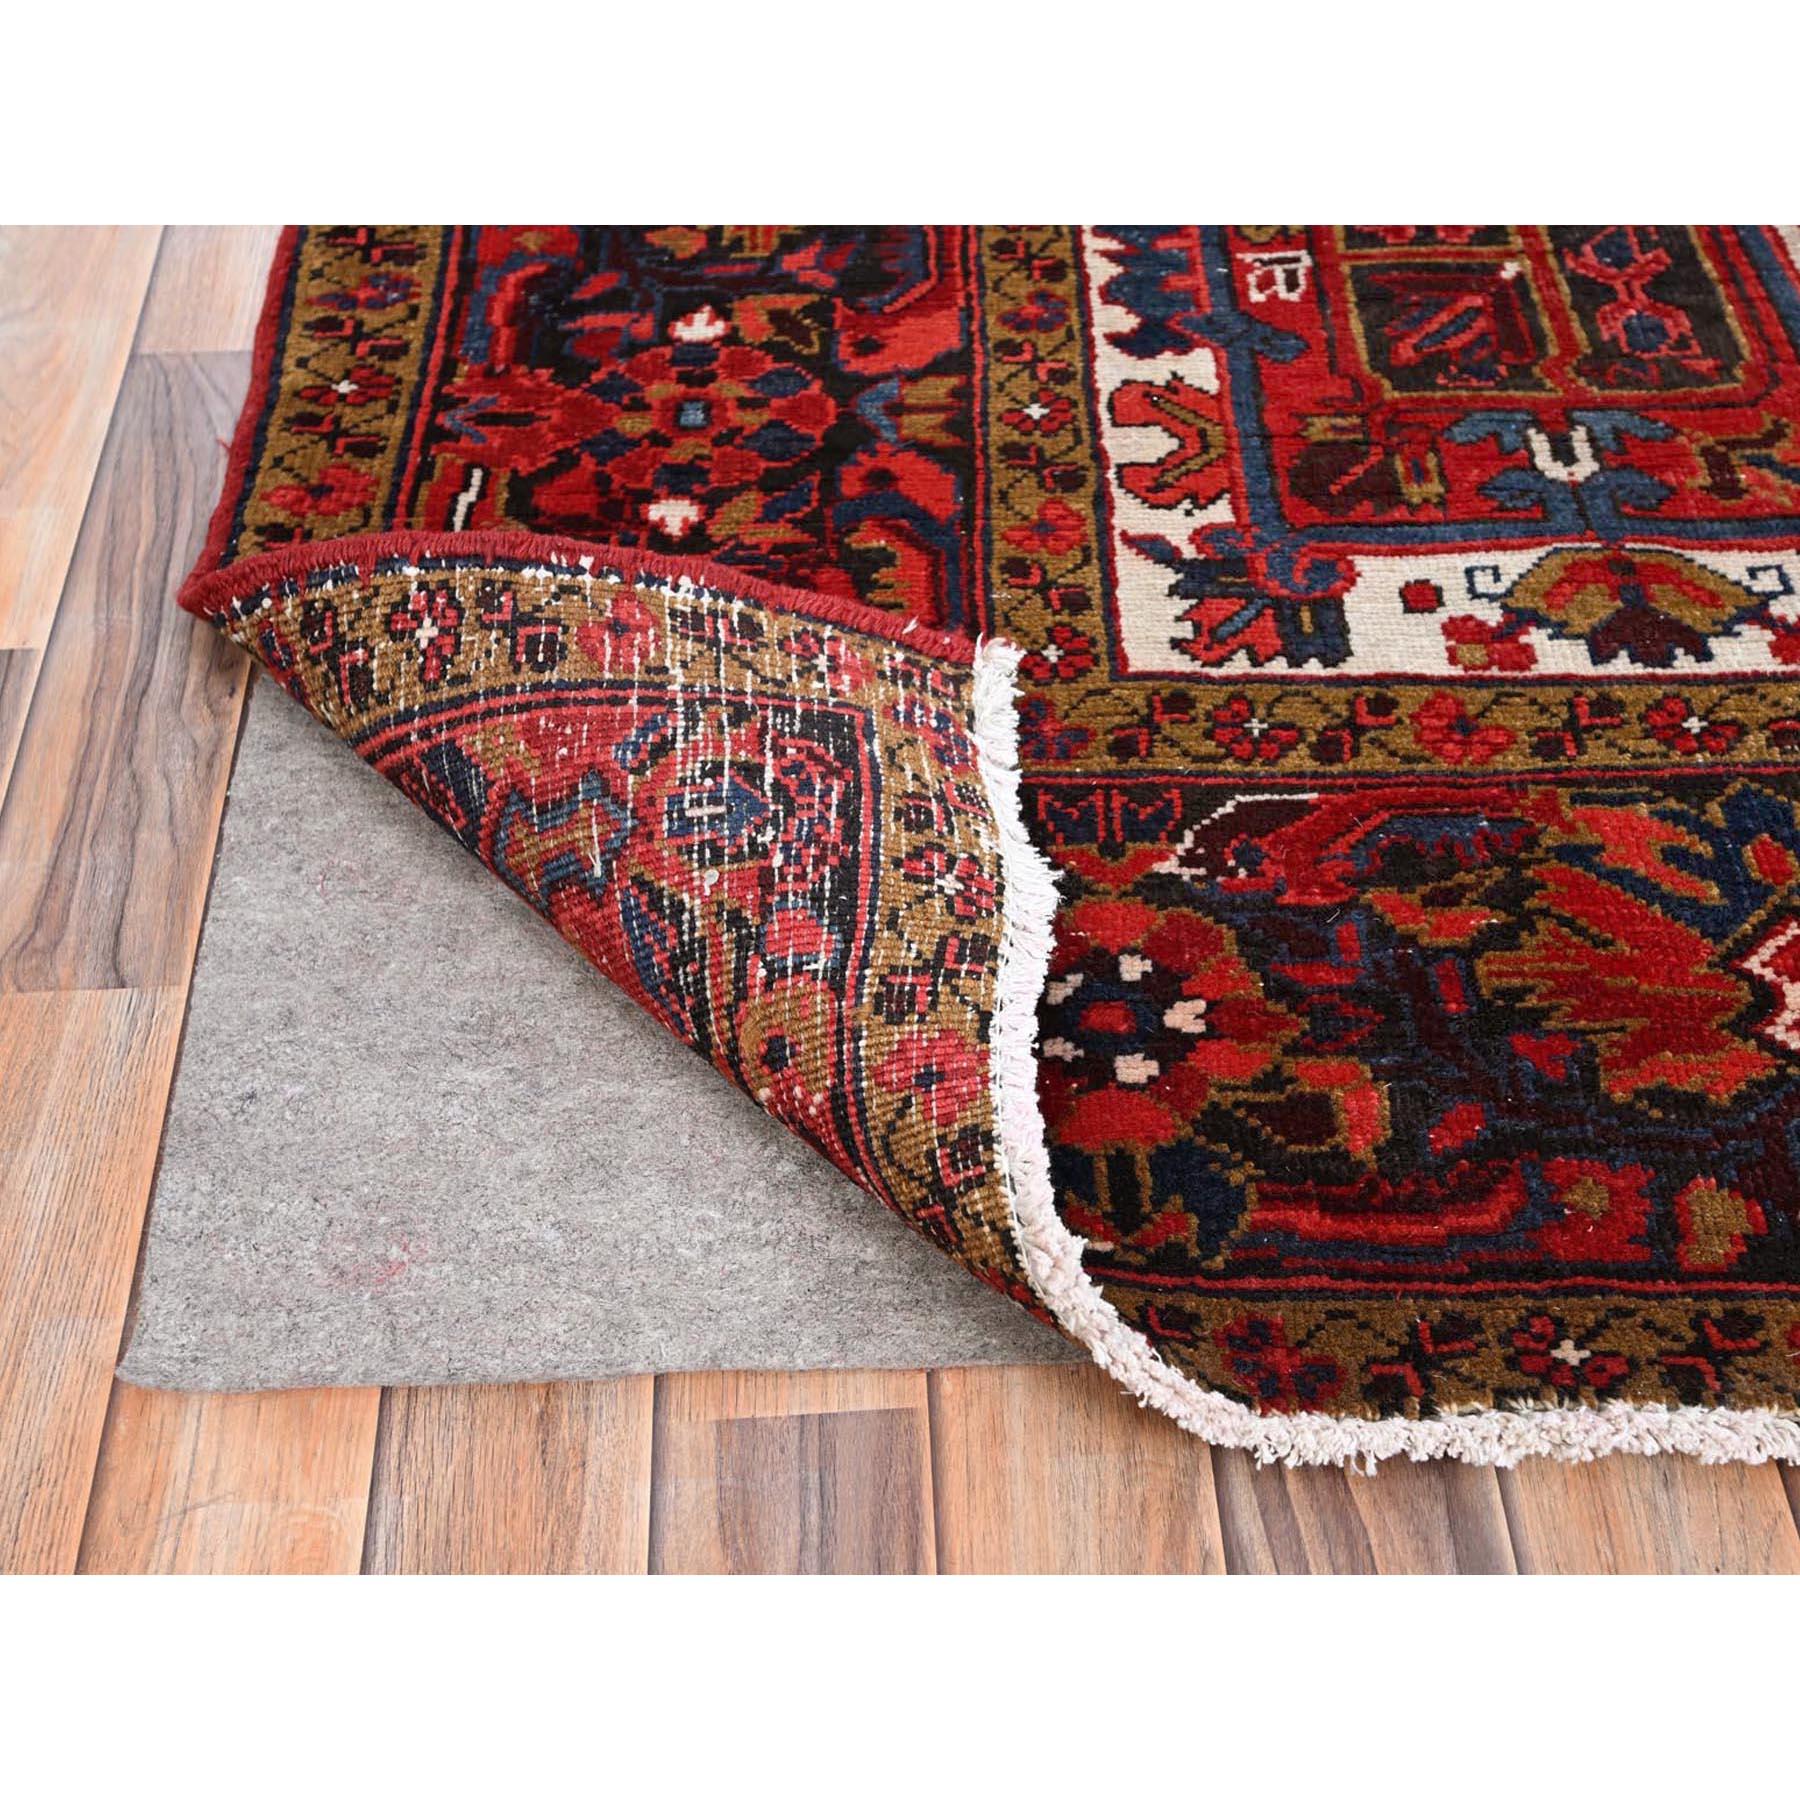 Mid-20th Century Barn Red Vintage Persian Heriz Good Cond Rustic Look Worn Wool Hand Knotted Rug For Sale